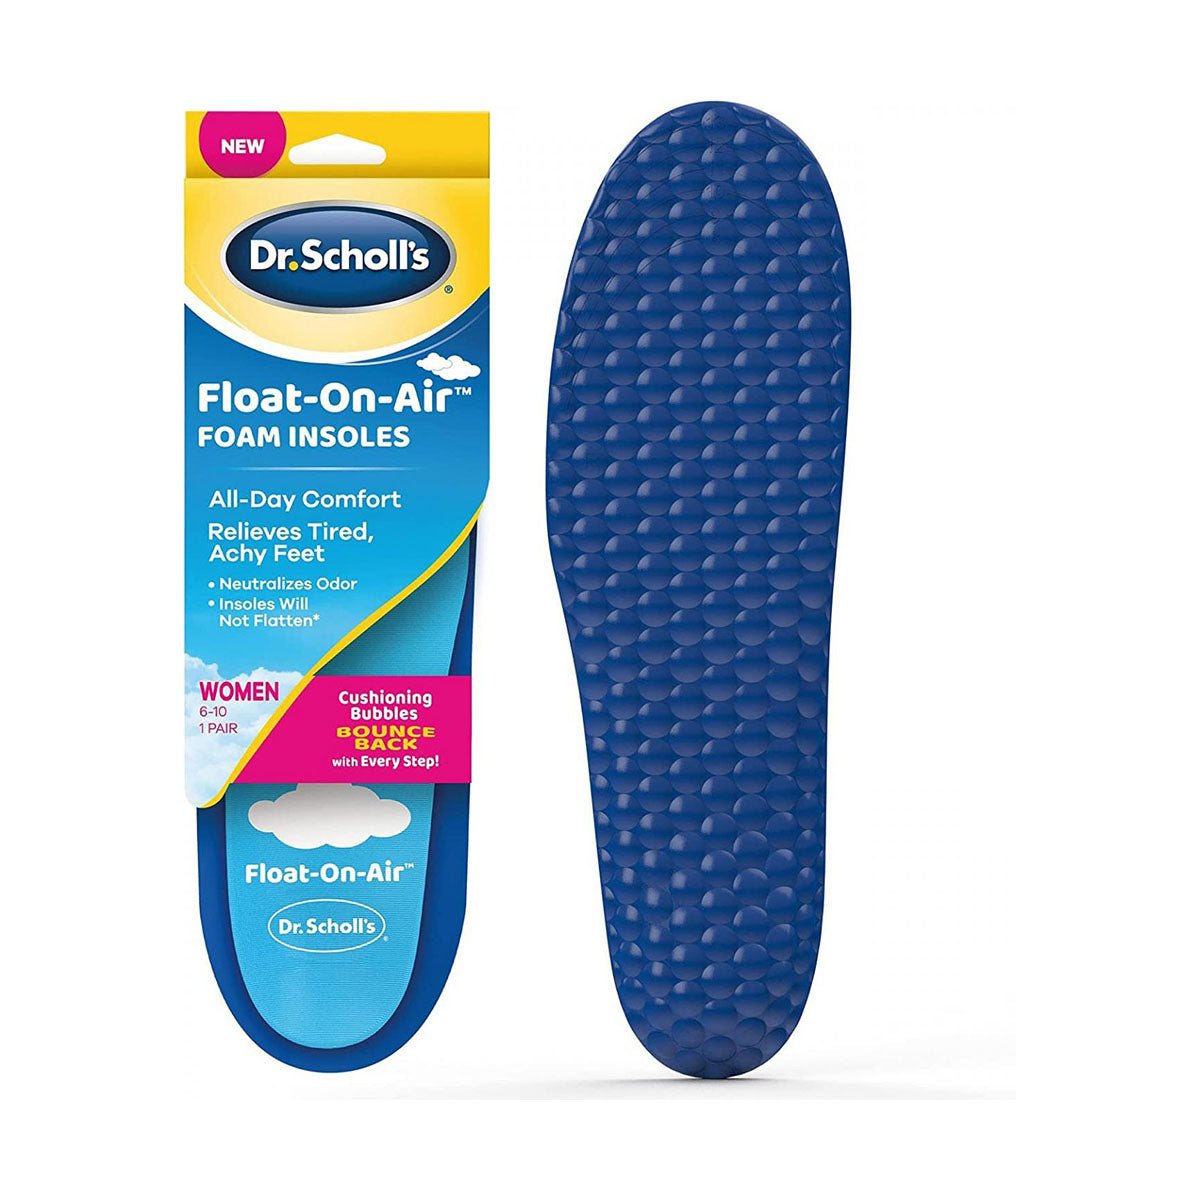 Dr. Scholl's Float-On-Air 鞋墊（女士款）